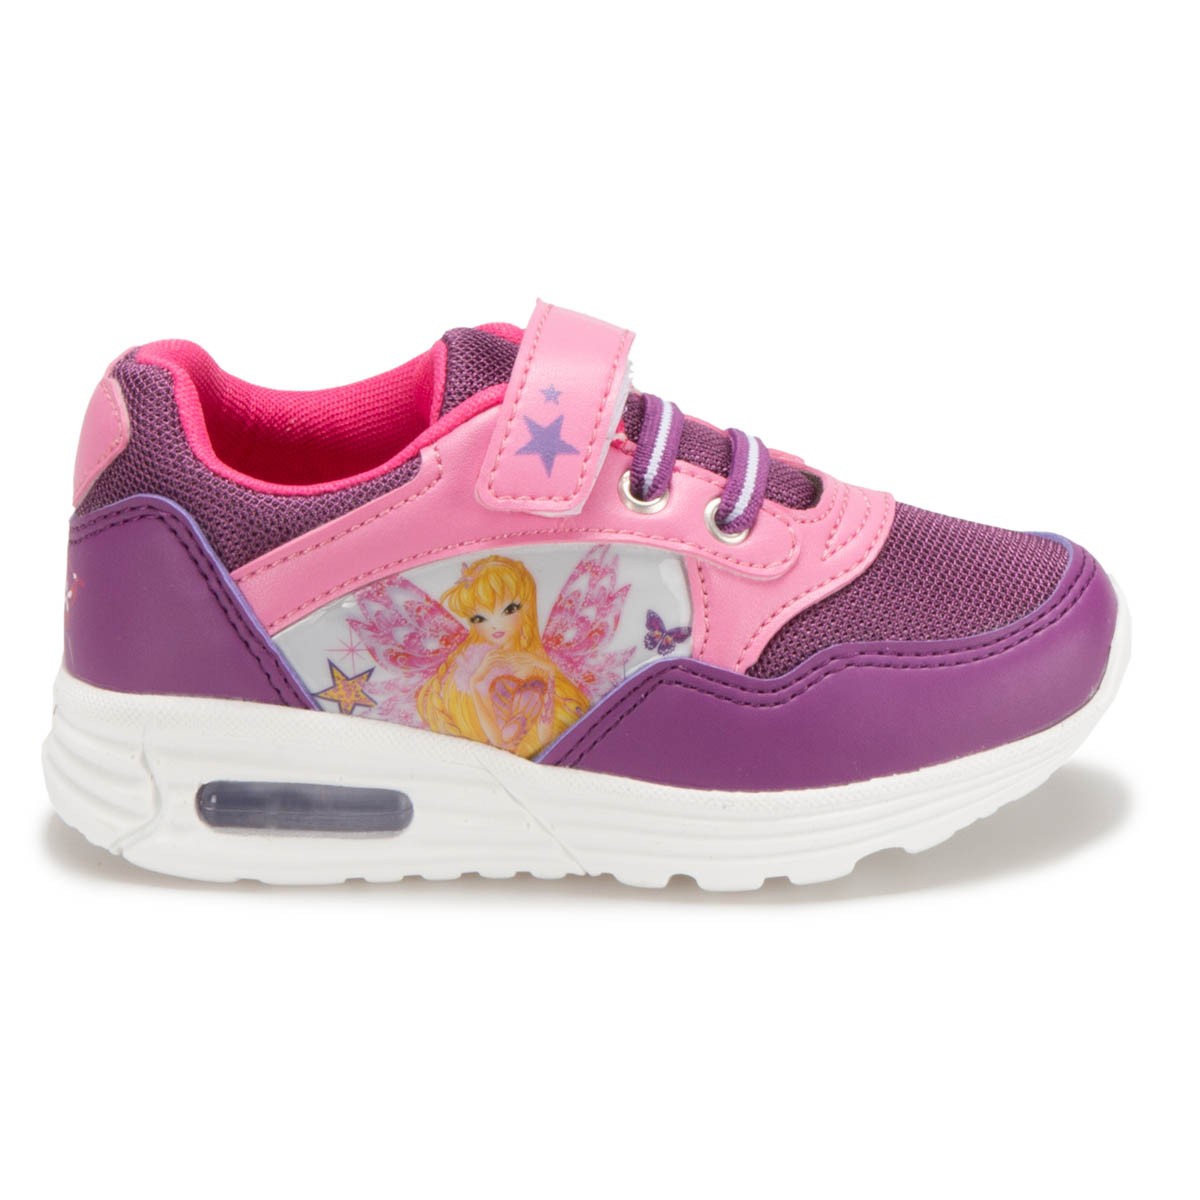 New Winx Club Butterflix Sport Shoes by Flo! - Winx Club All